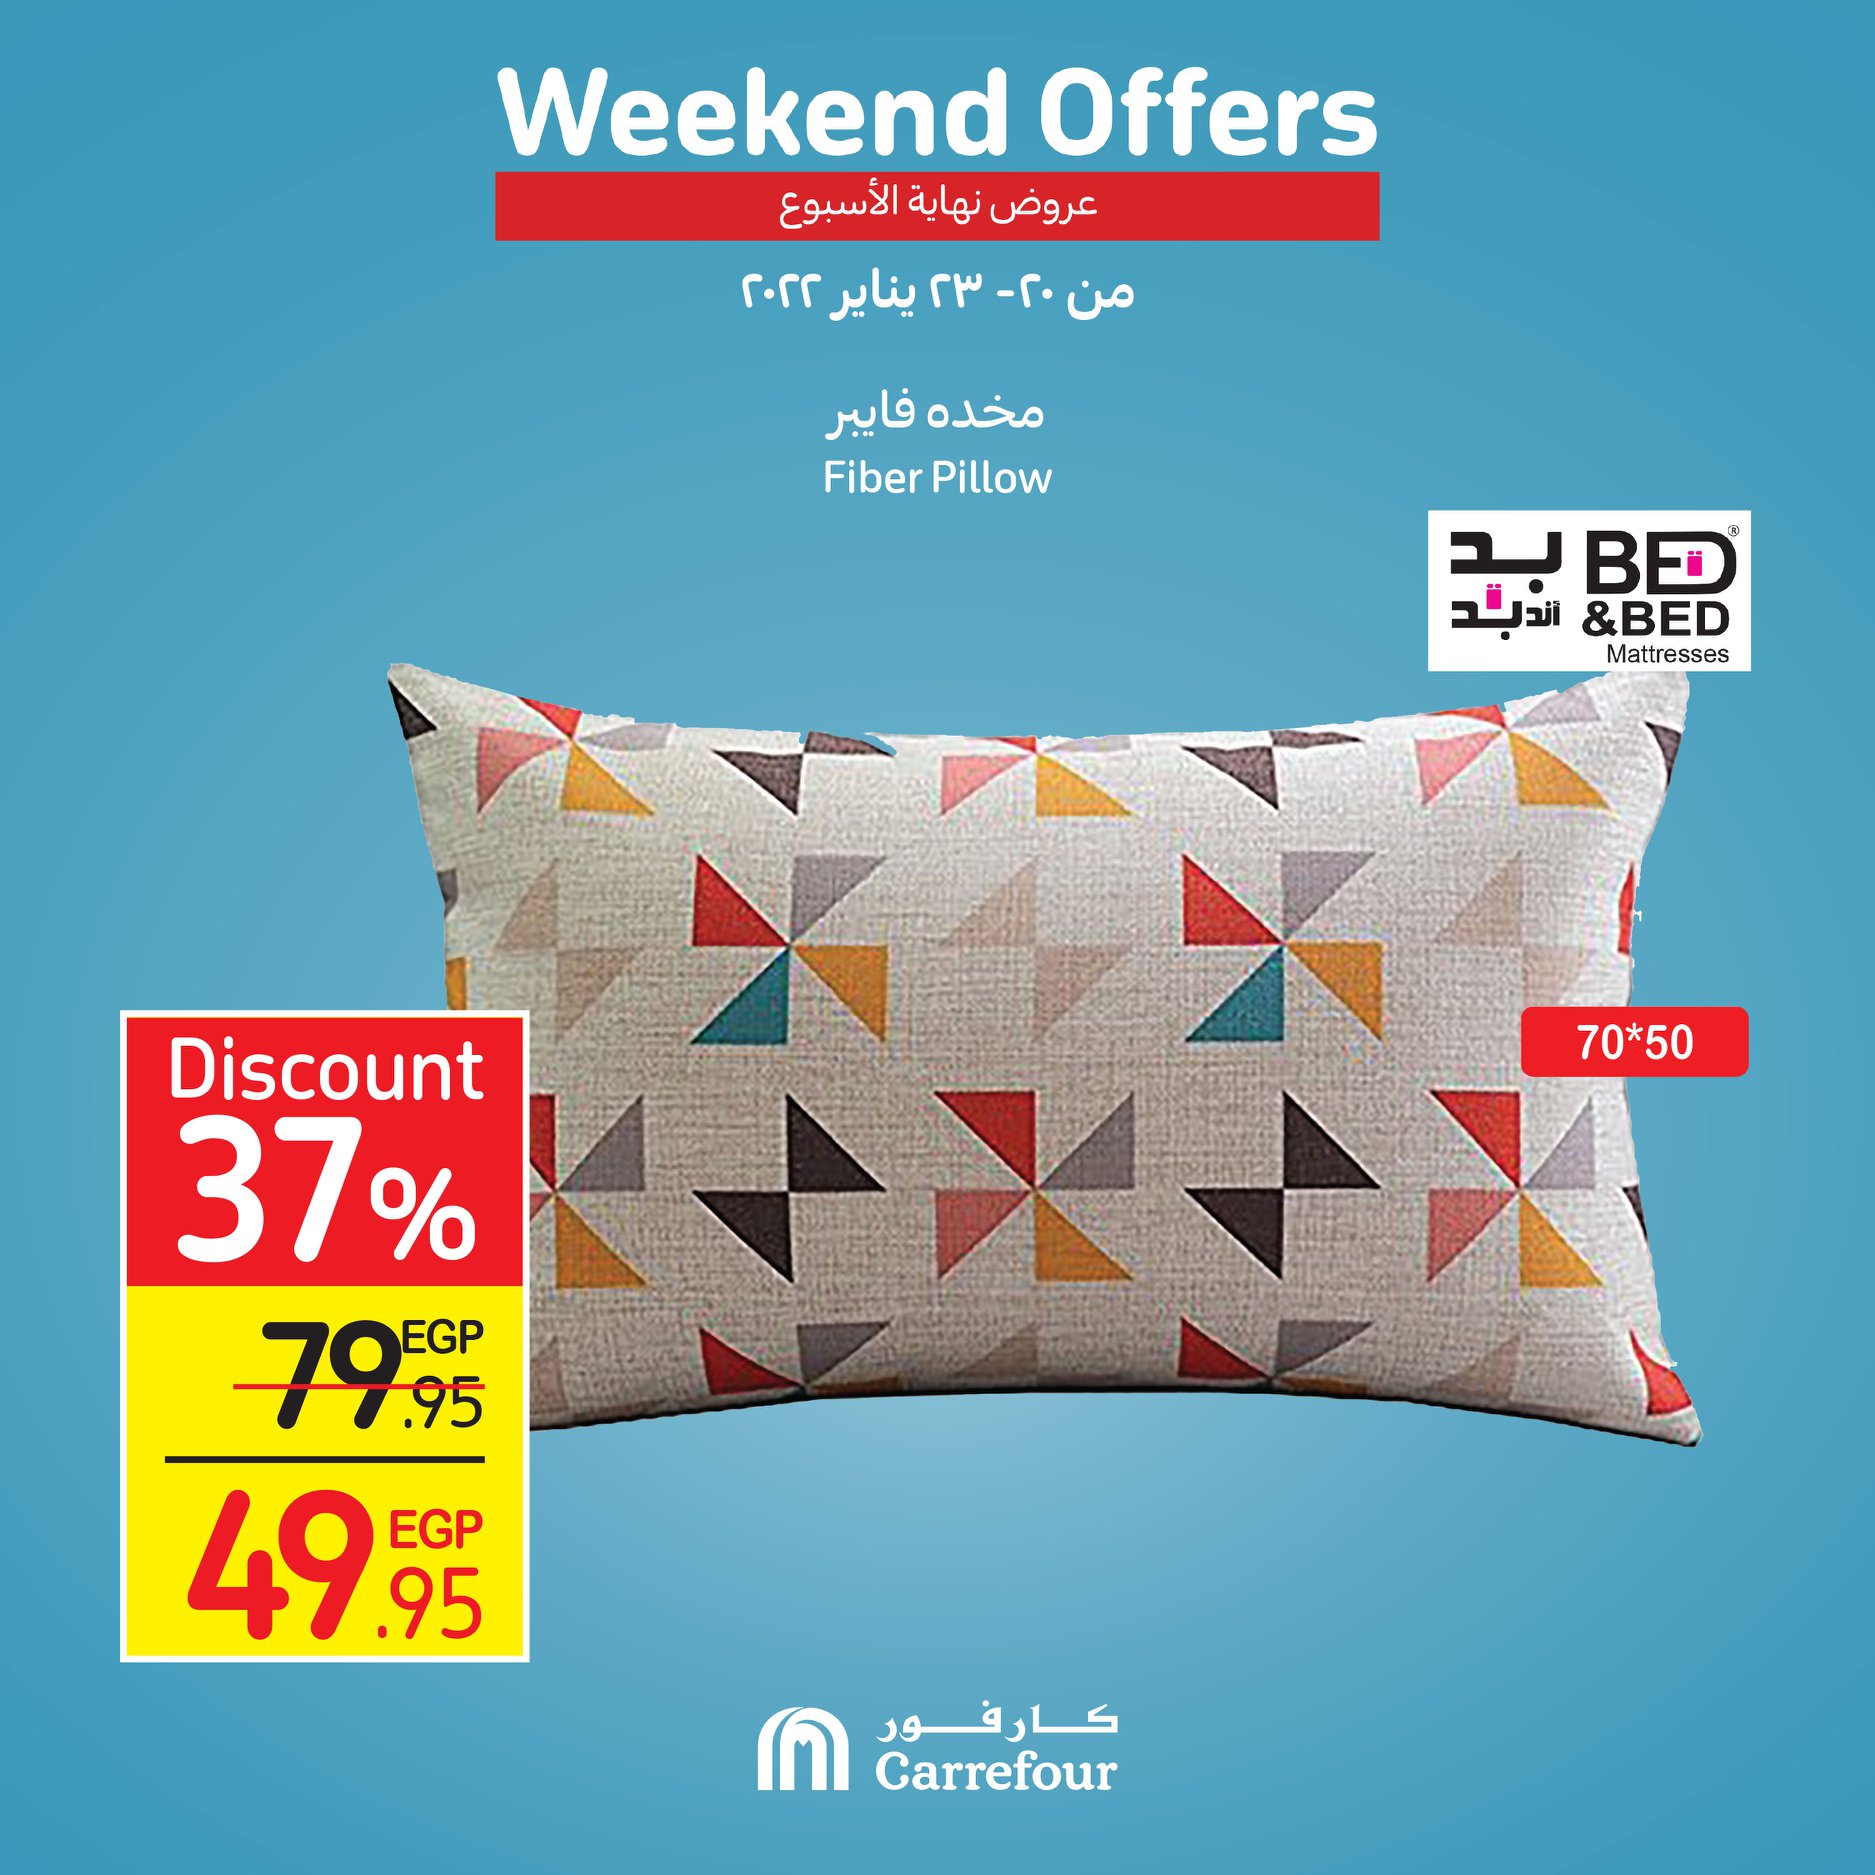 Watch Carrefour's gifts and surprises at Weekend and dirt cheap prices 32